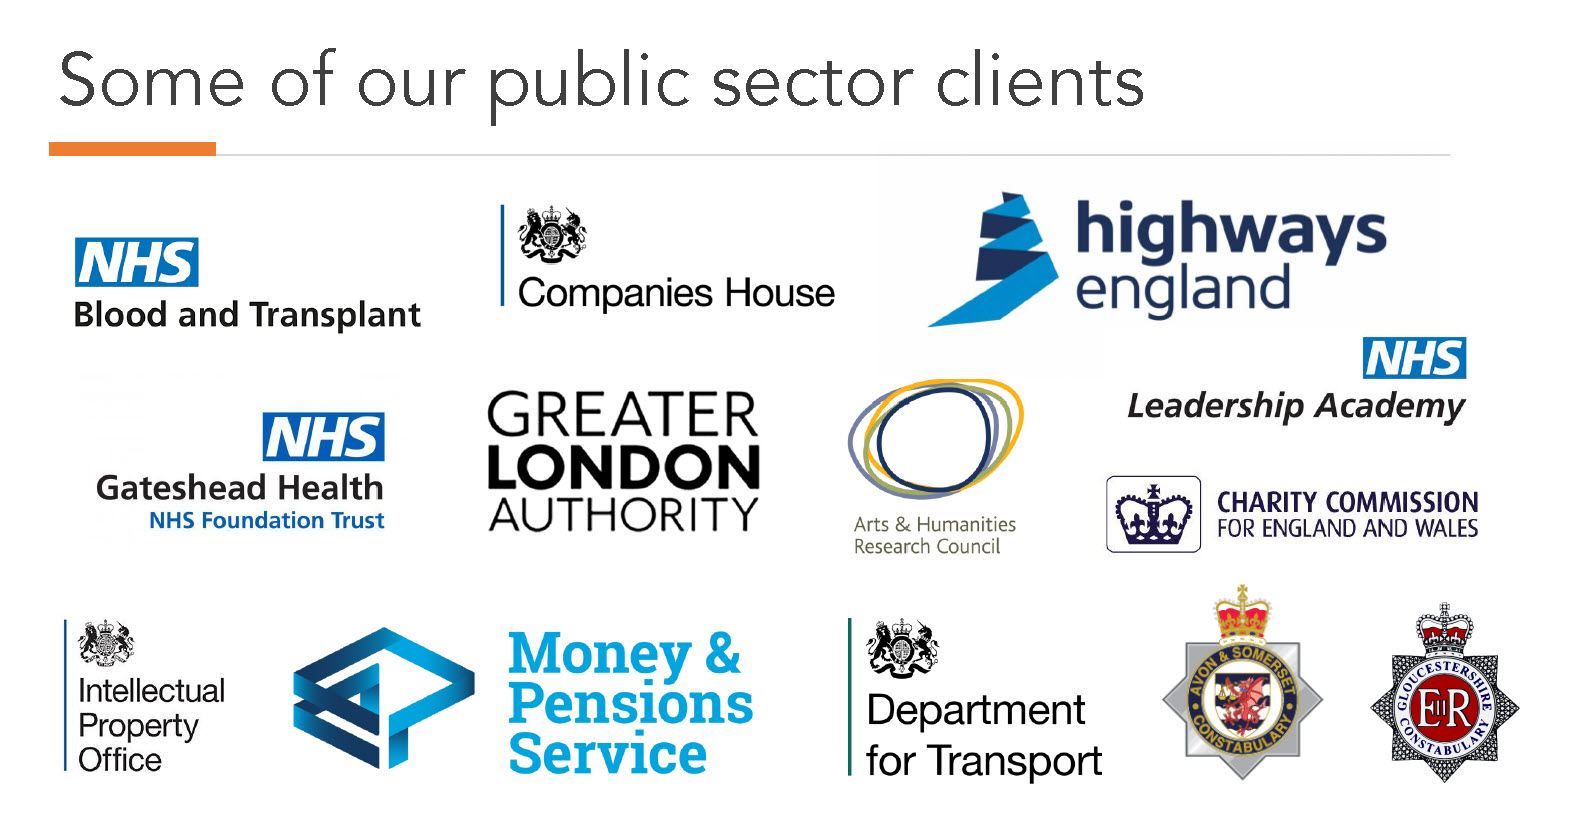 Public sector clients logos including NHS Blood and Transplant, Highways England, Intellectual Property Office